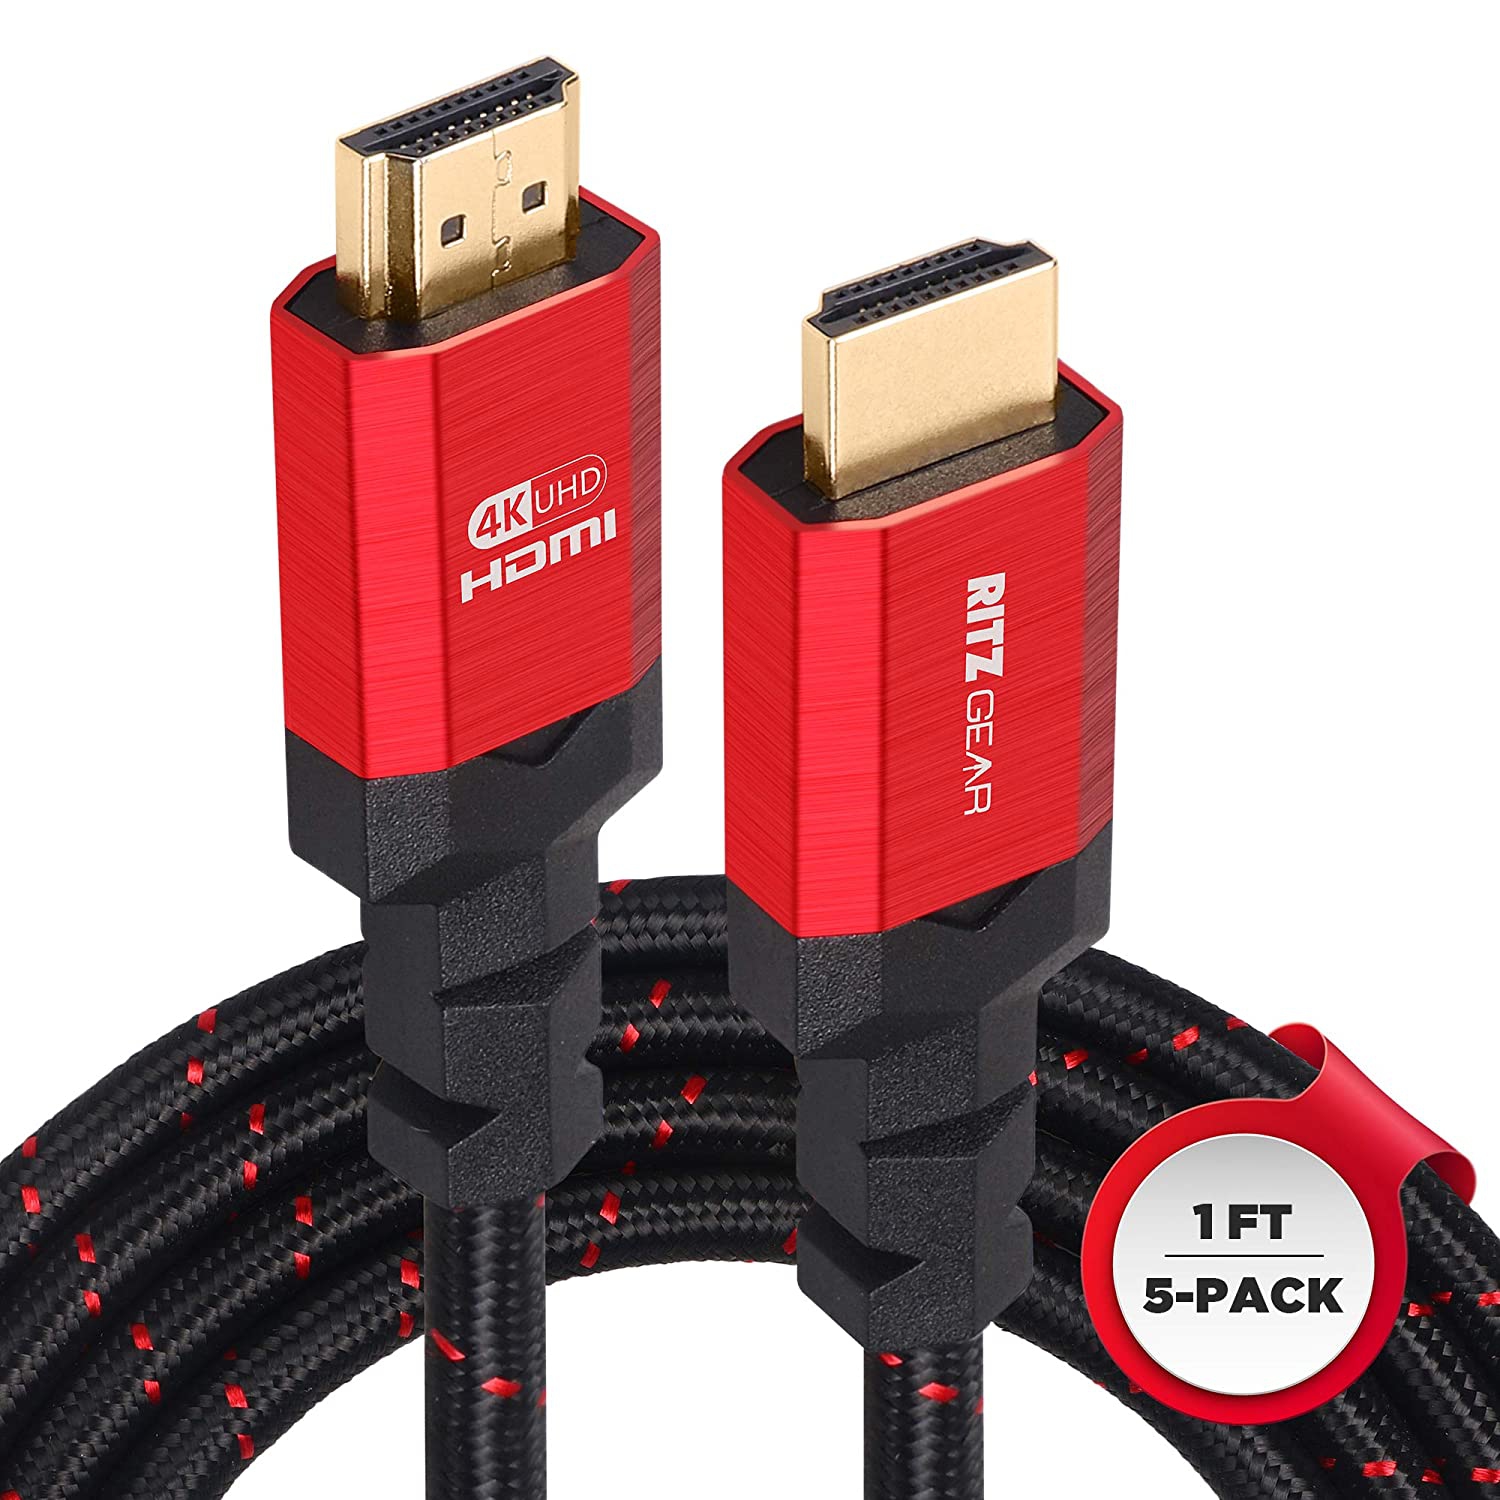 Ritz Gear 4K HDMI Cable 1 ft [5 Pack] Braided Nylon Cord & Gold Connectors, High Speed HDMI 2.0 with Ethernet, Compatible with PS5, PS4, PS3, Xbox, Roku, Apple TV, HDTV, Blu-ray, Laptop, PC, Monitor